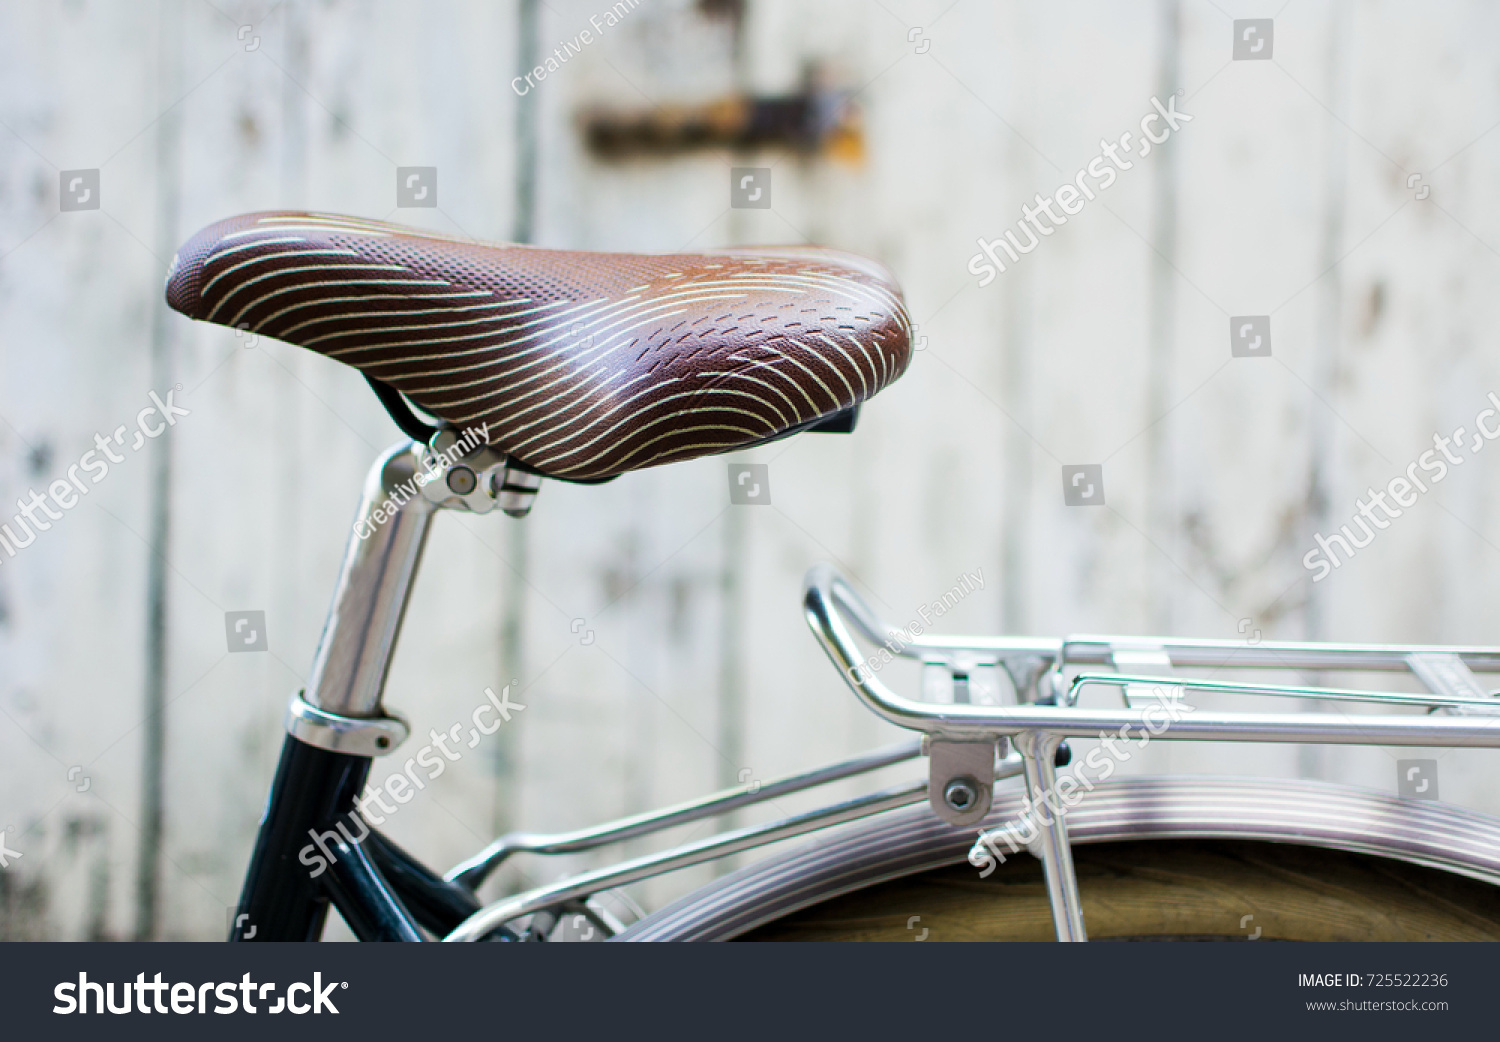 Vintage bicycle with leather seat close up #725522236